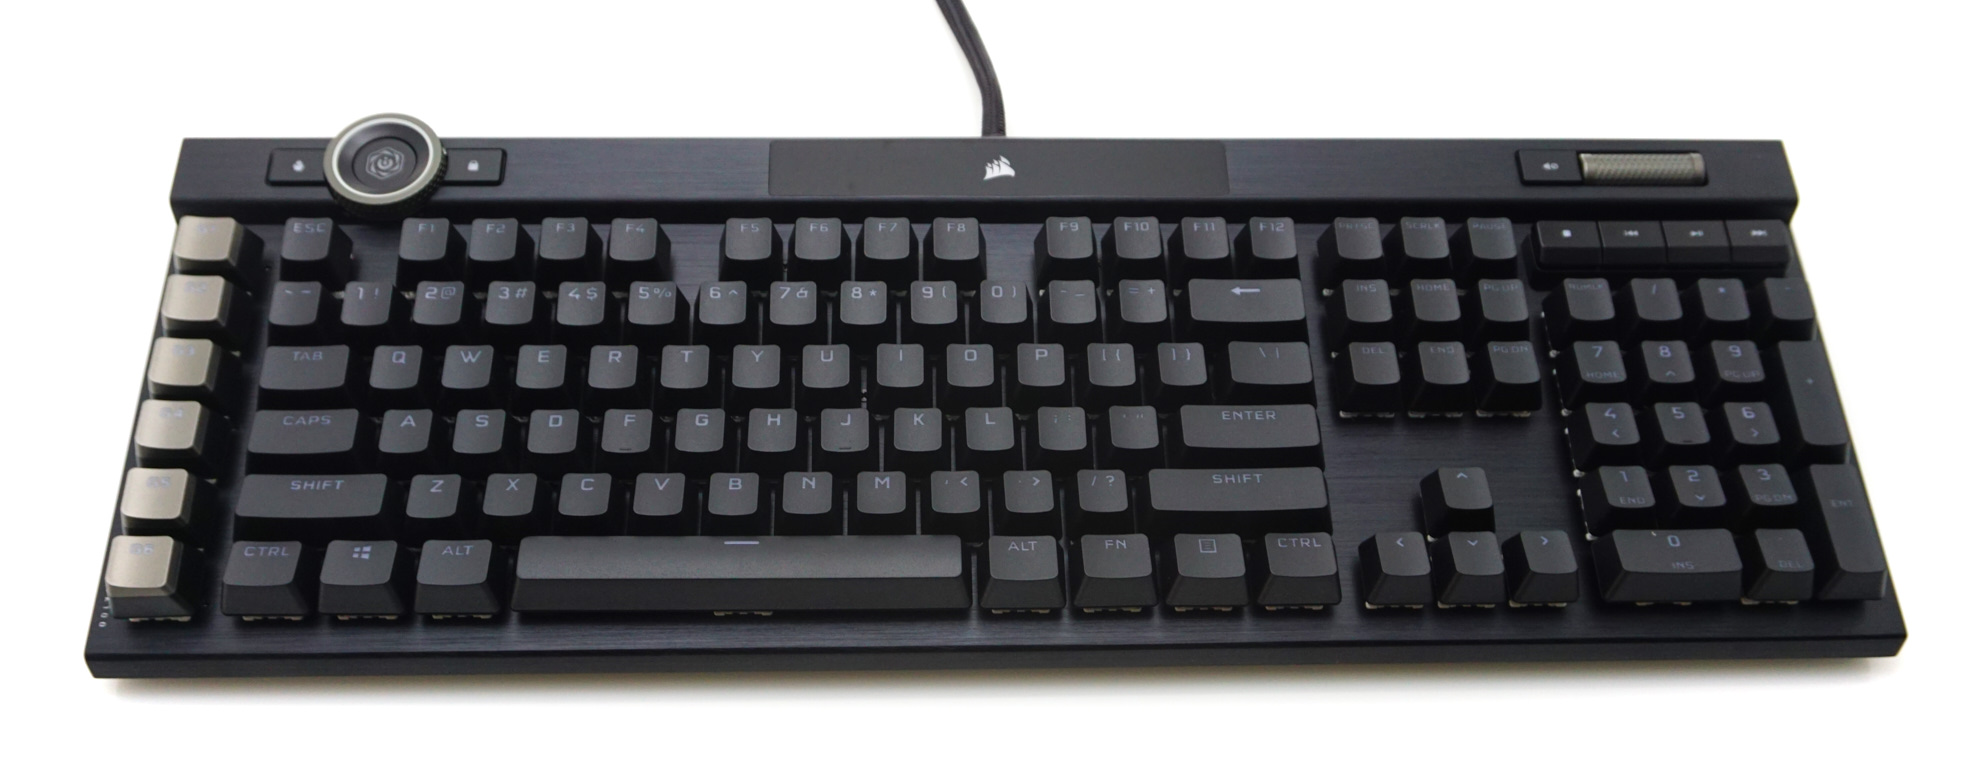 Hare udskille personlighed The Corsair Gaming K100 RGB Keyboard Review: Optical-Mechanical Masterpiece